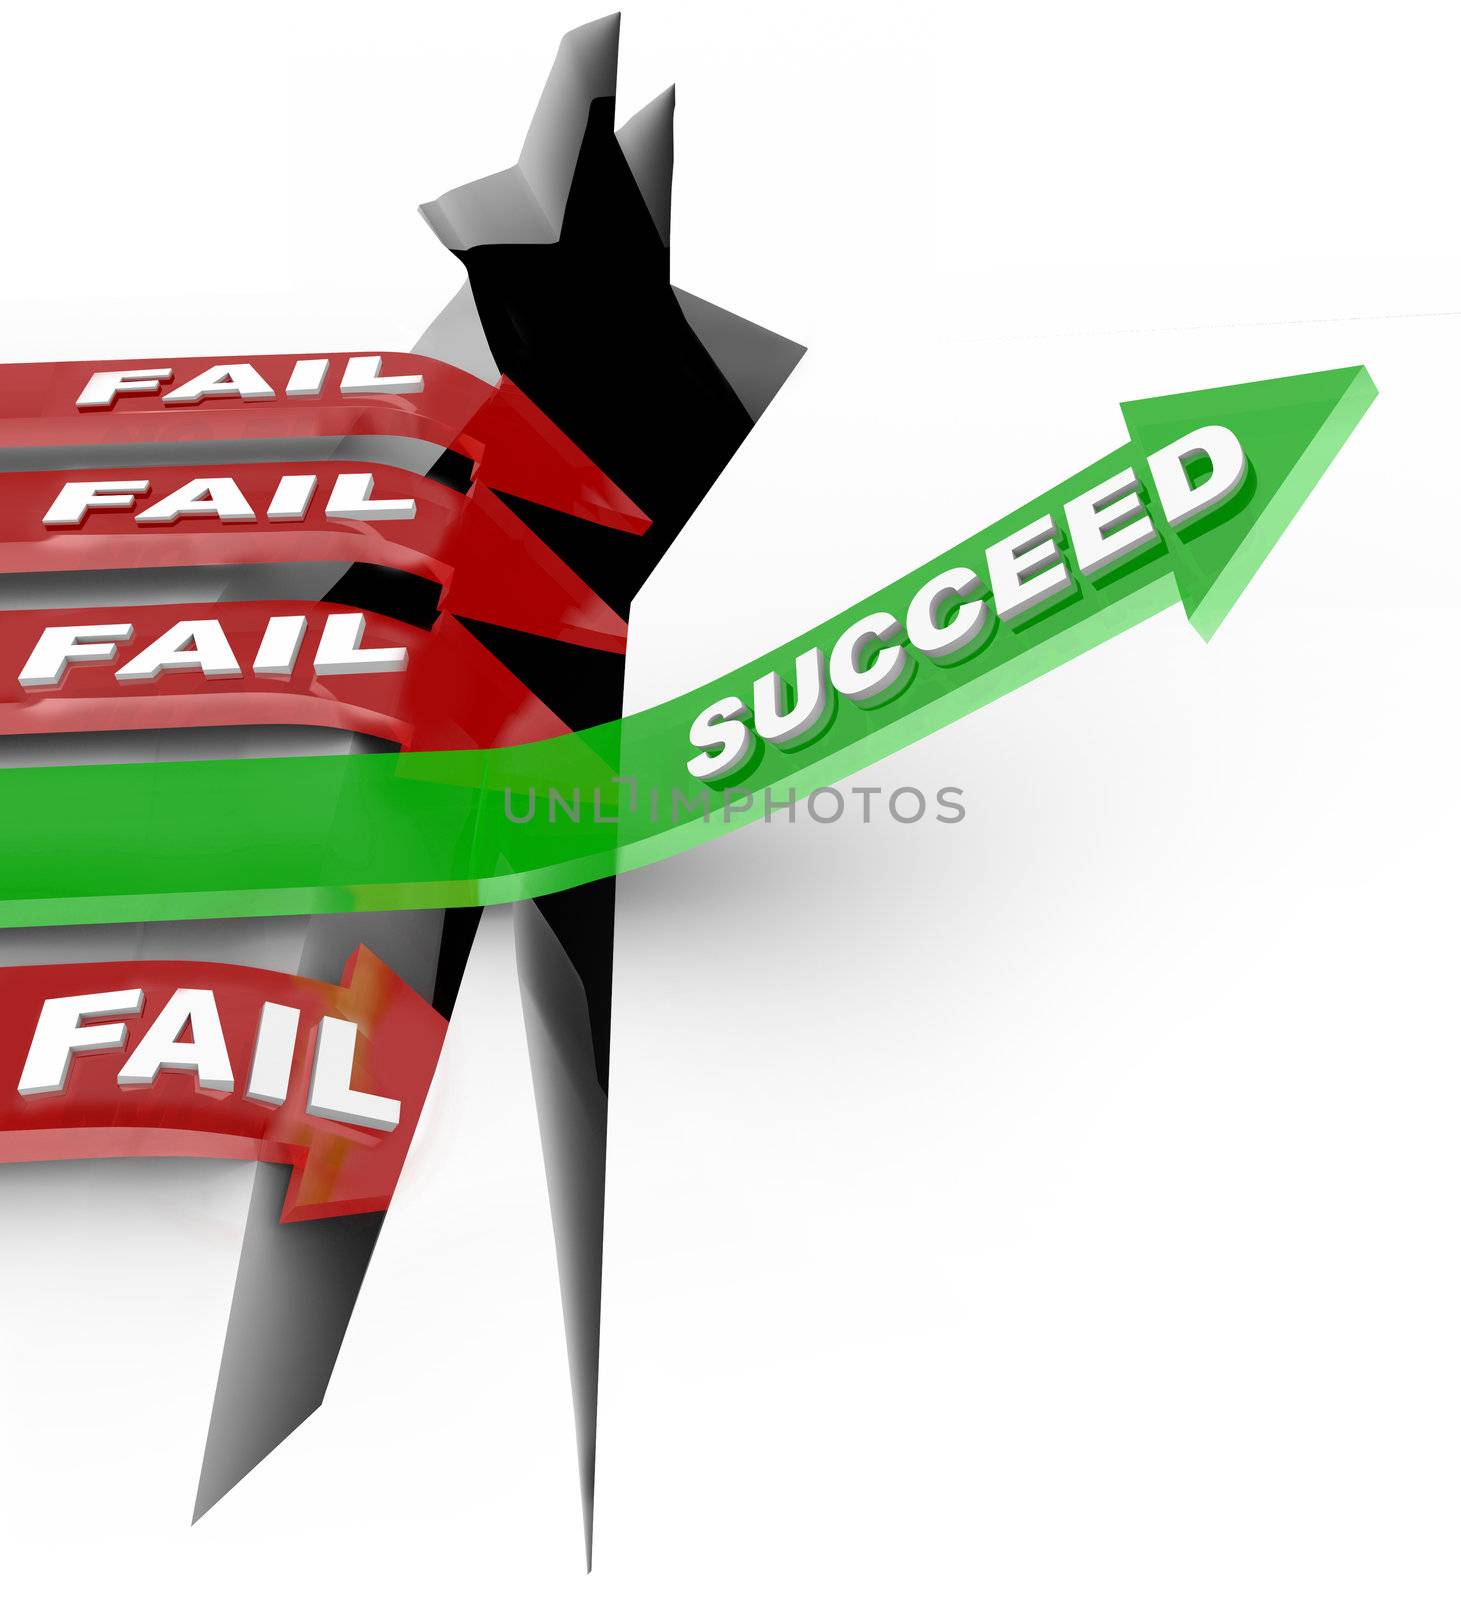 Several red arrow with the word Fail plunge into a chasm while one successful green arrow with the word Succeed rises above the challenge to win a competition